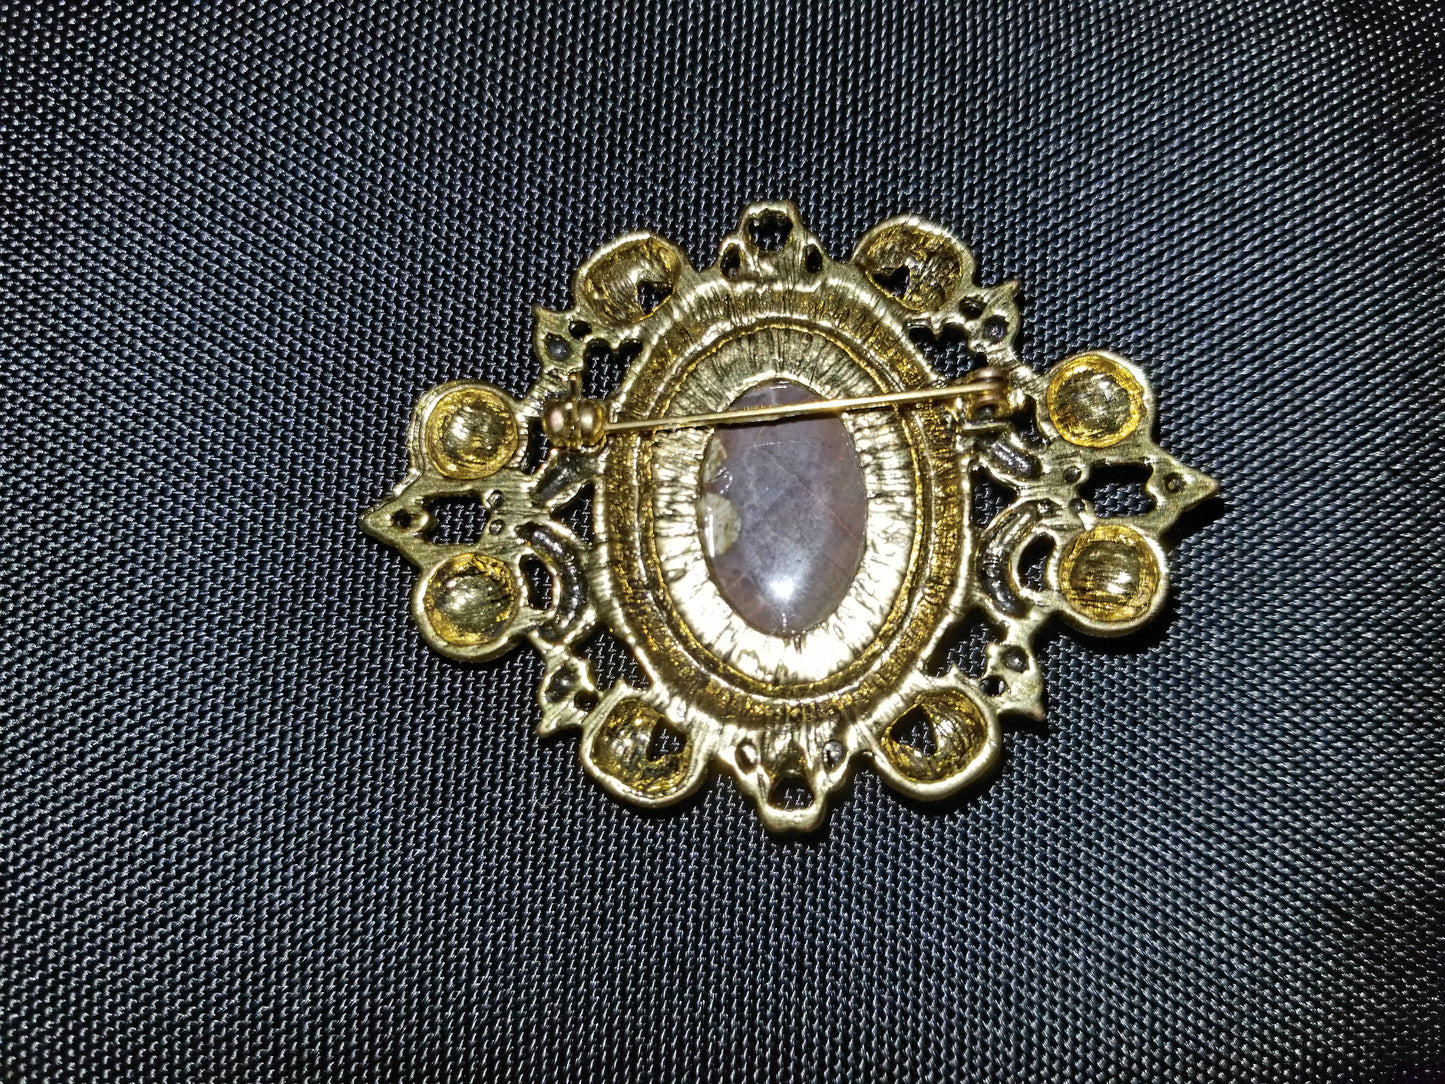 Camou-chic Cabochon Brooch